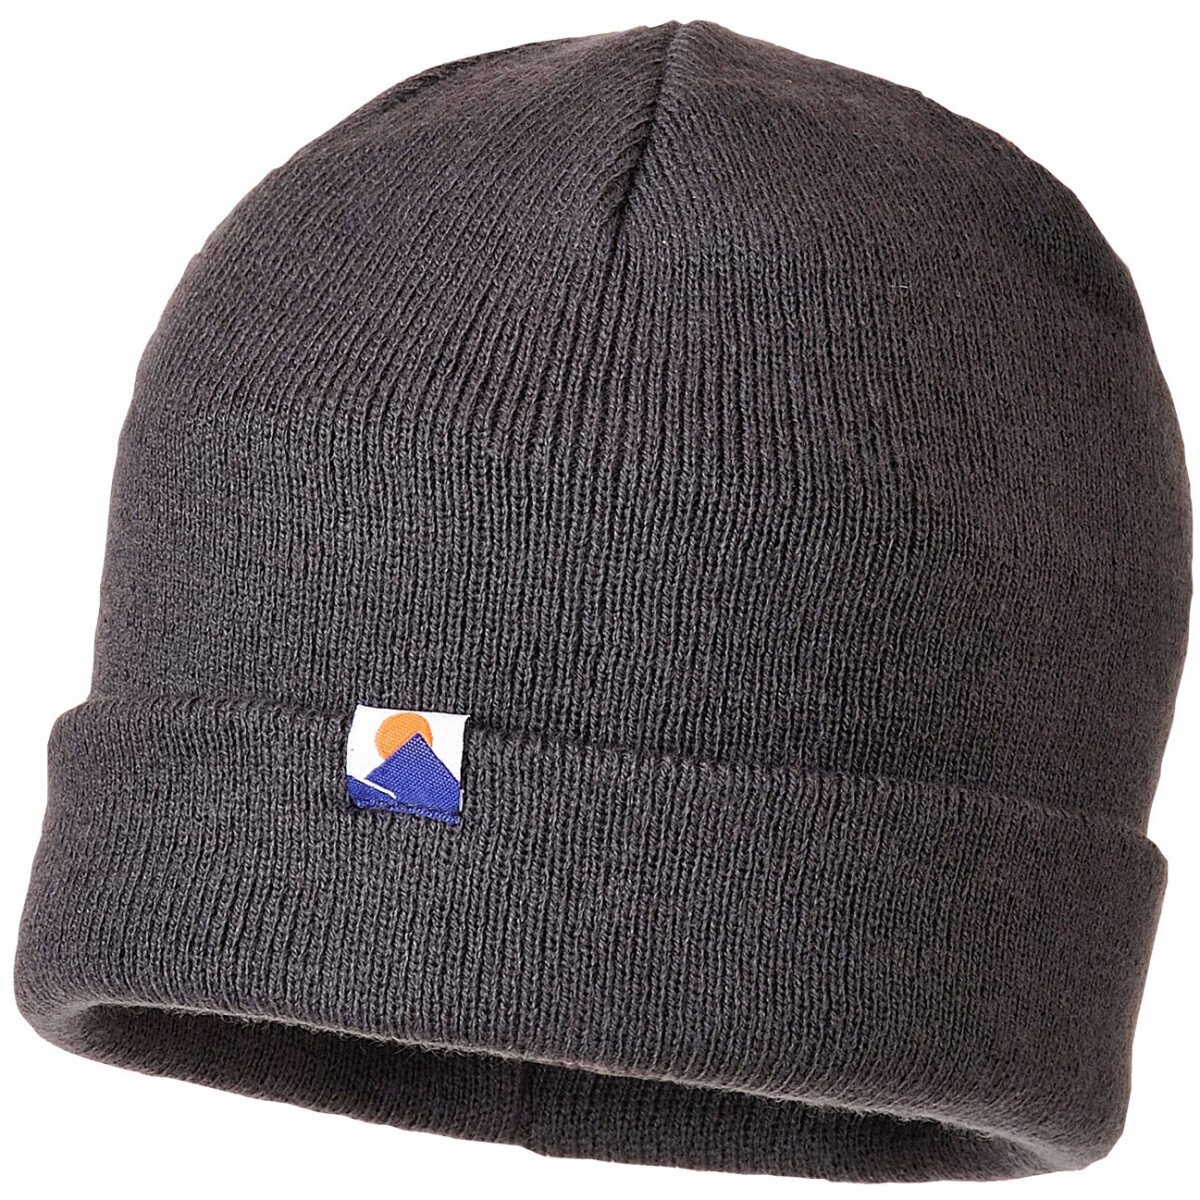 Portwest B013 Insulated Knit Cap Thinsulate Lined Insulatex Lined from ...